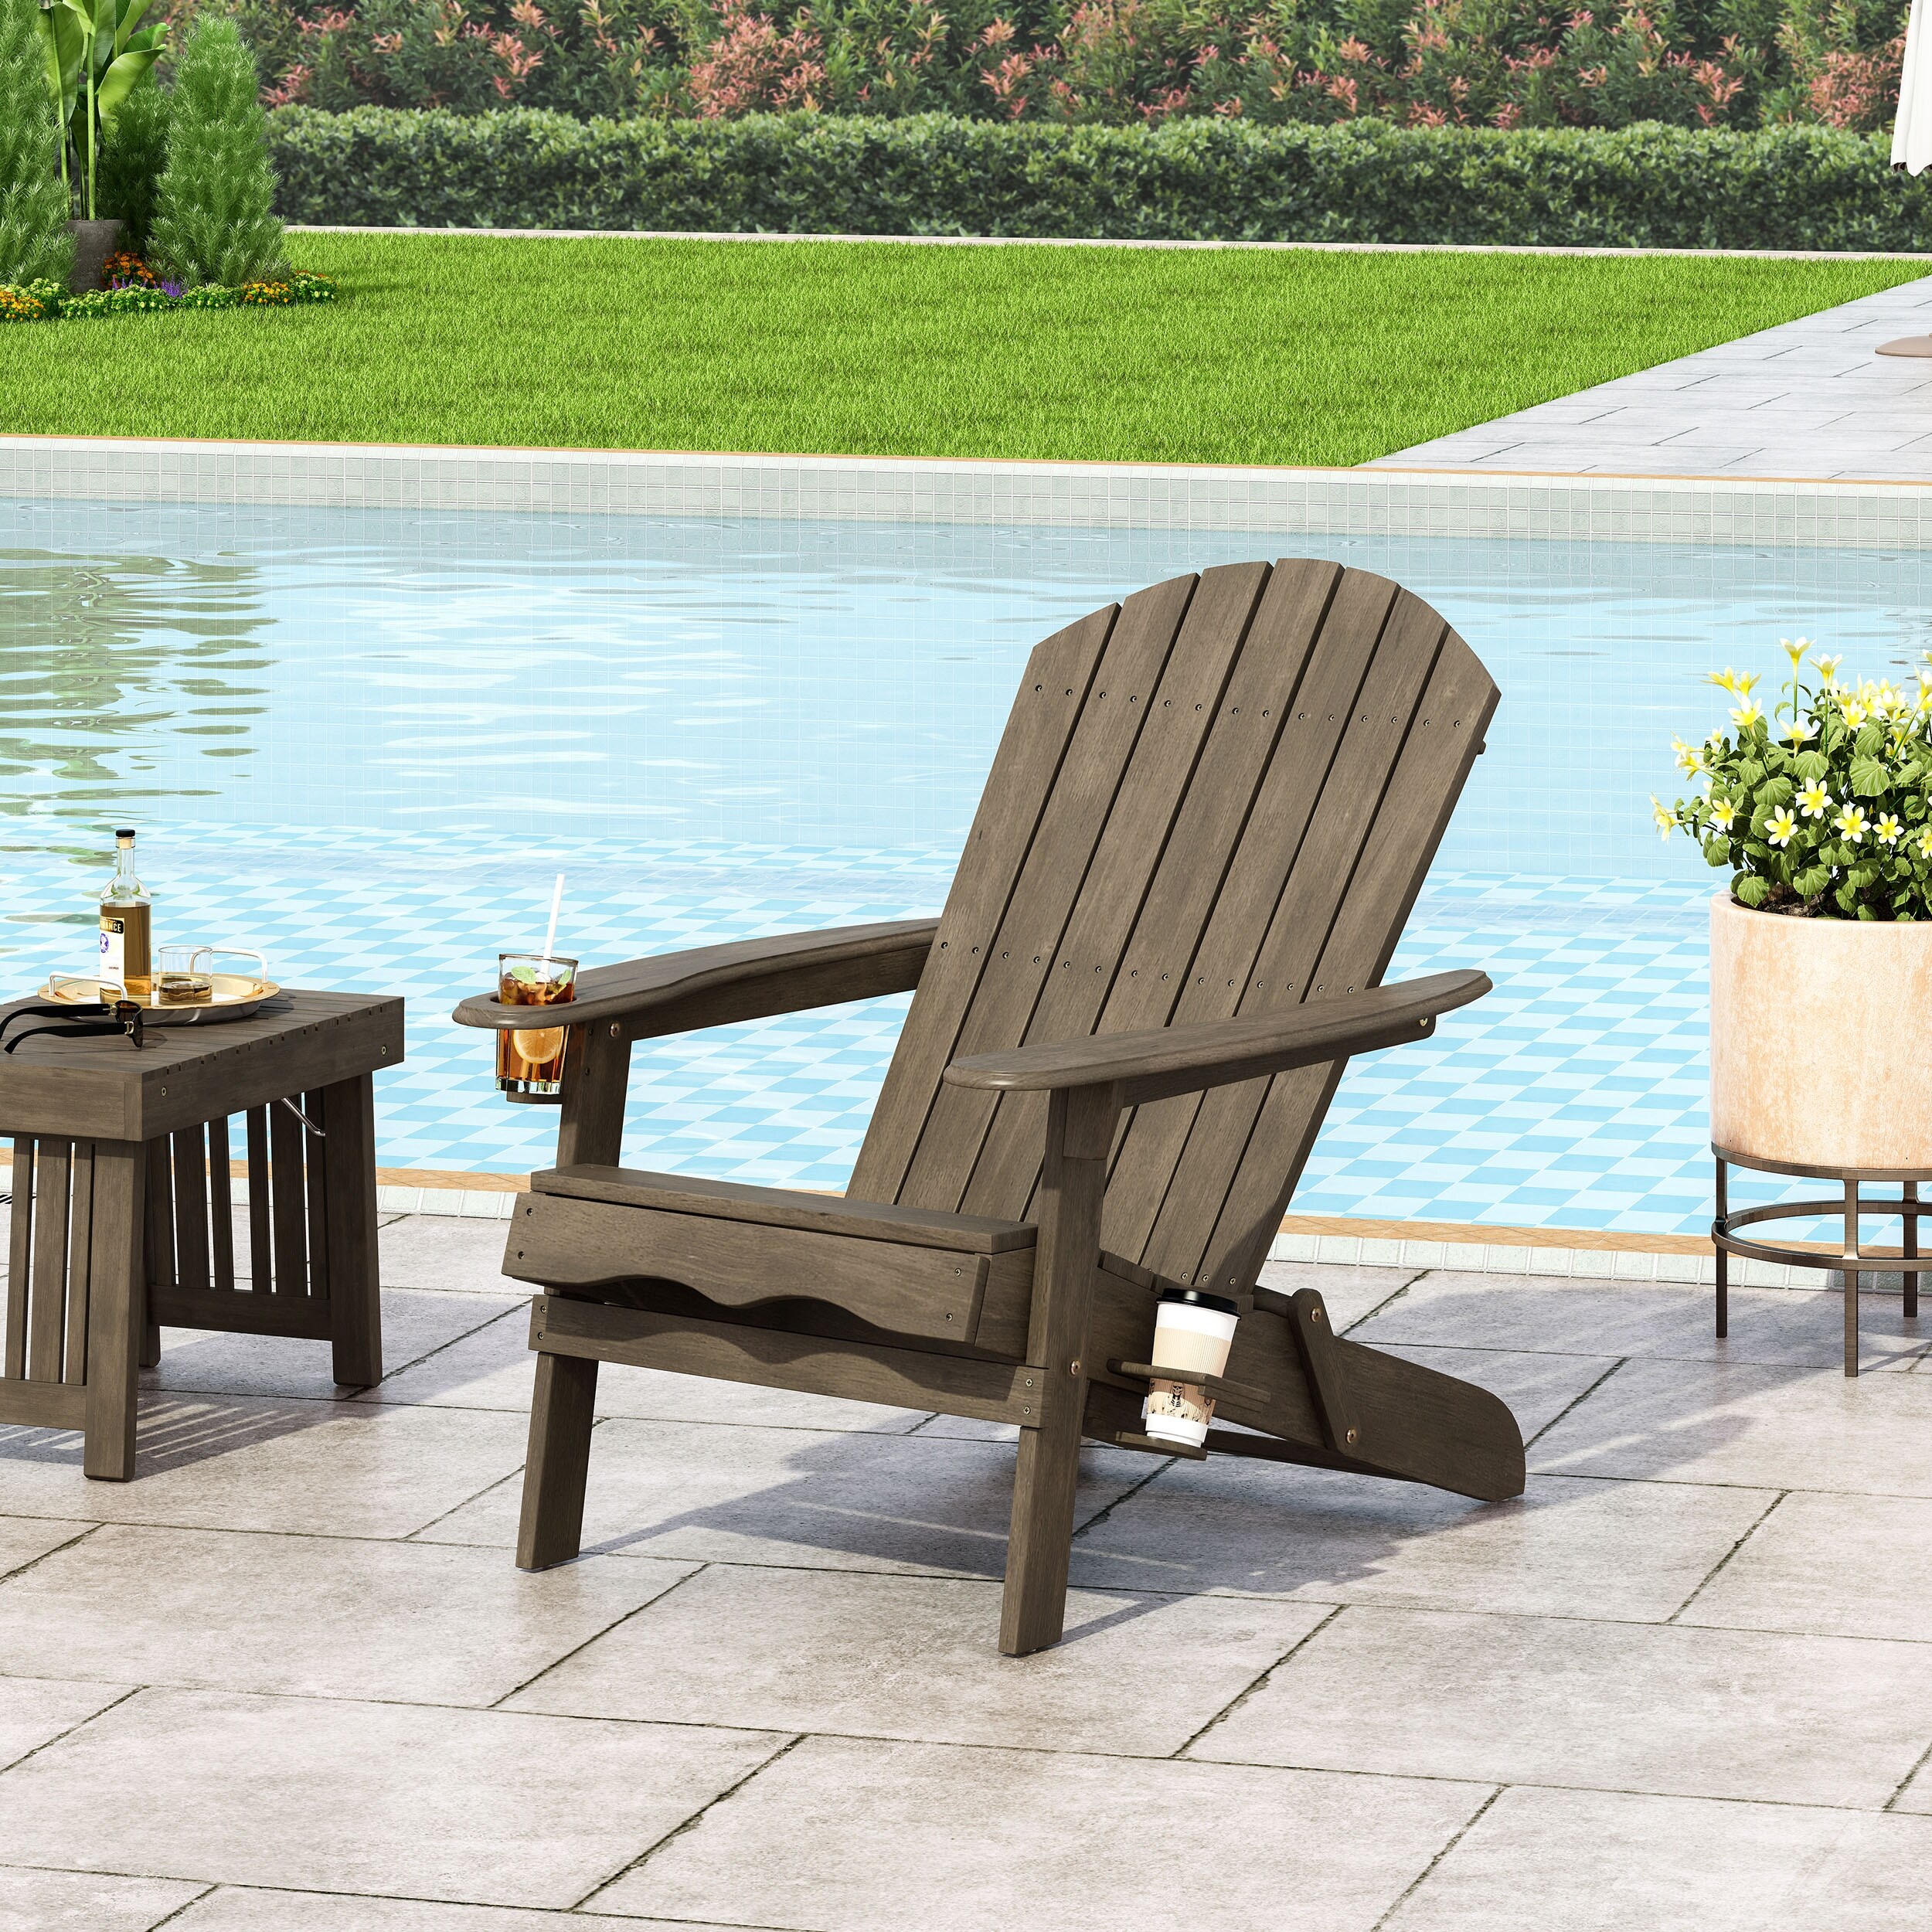 Black Christopher Knight Home 312650 Aberdeen Outdoor Contemporary Acacia Wood Foldable Adirondack Chair 